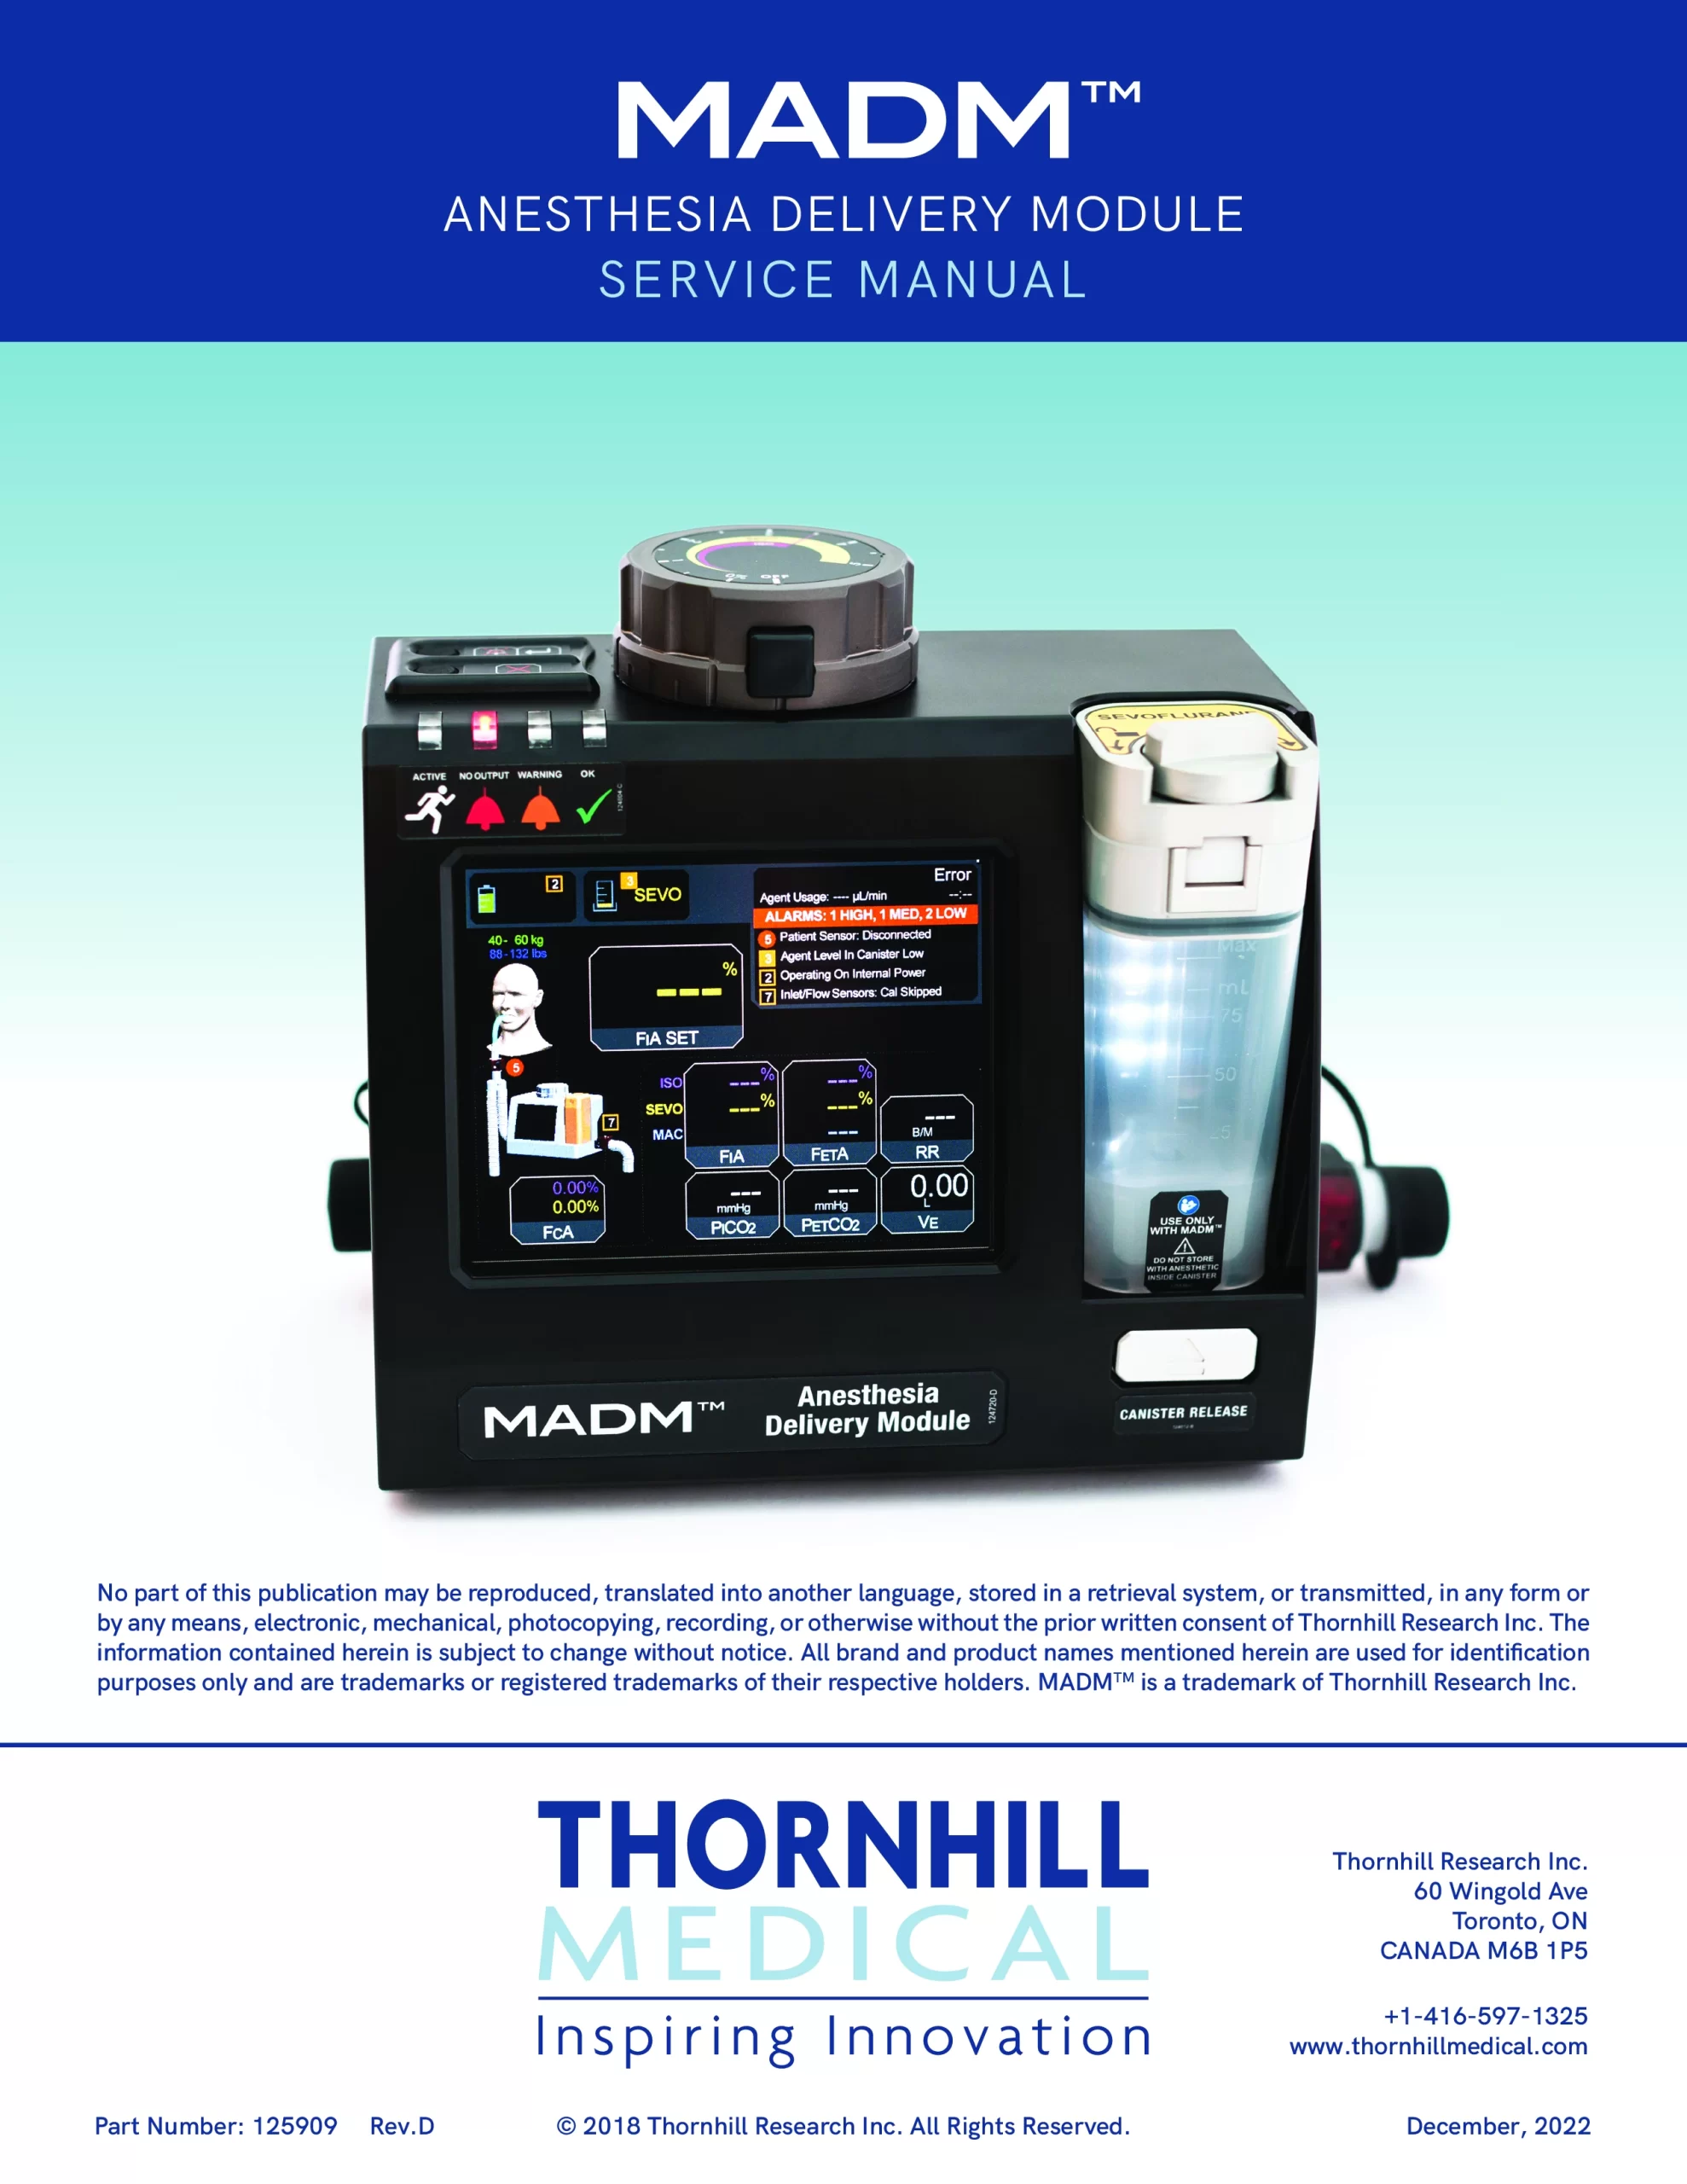 MADM Service Manual Cover